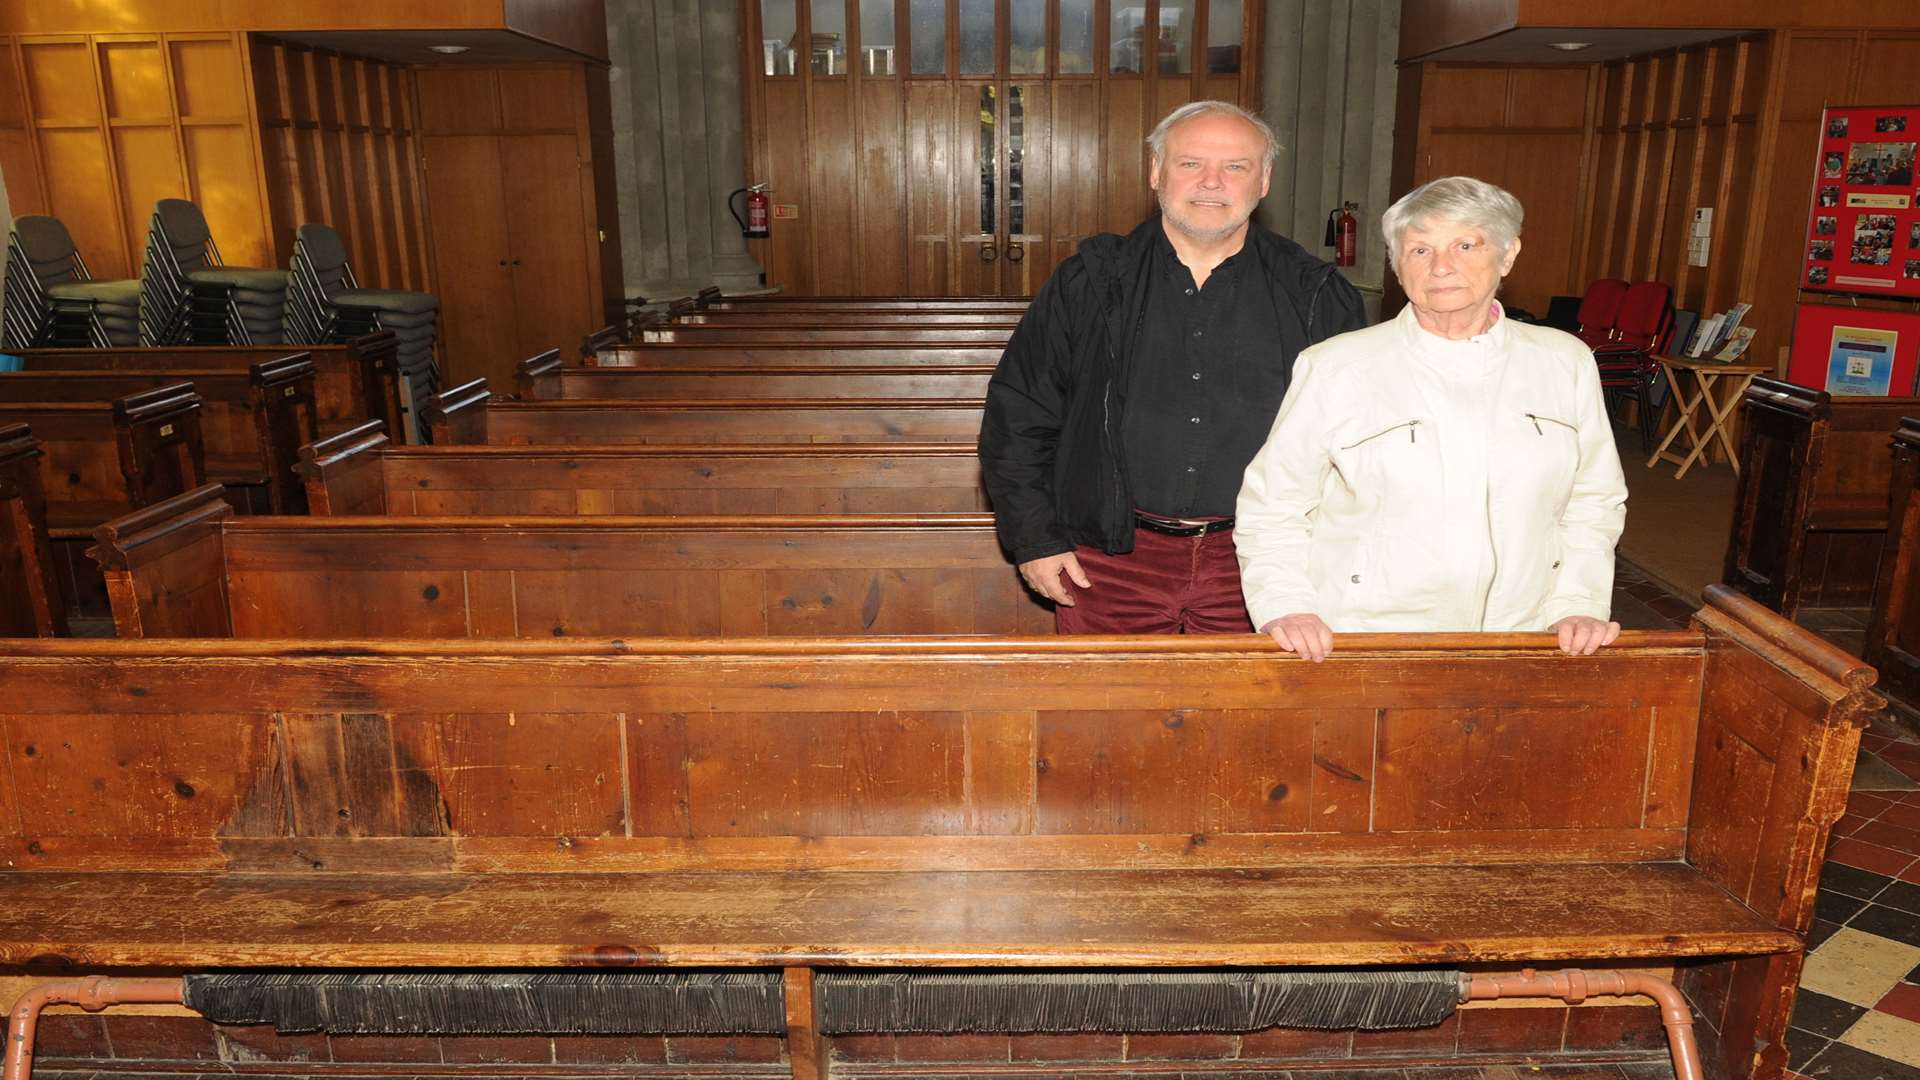 Church wardens Frank Pantony and Janet Willis with the 'uncomfortable' traditional pews